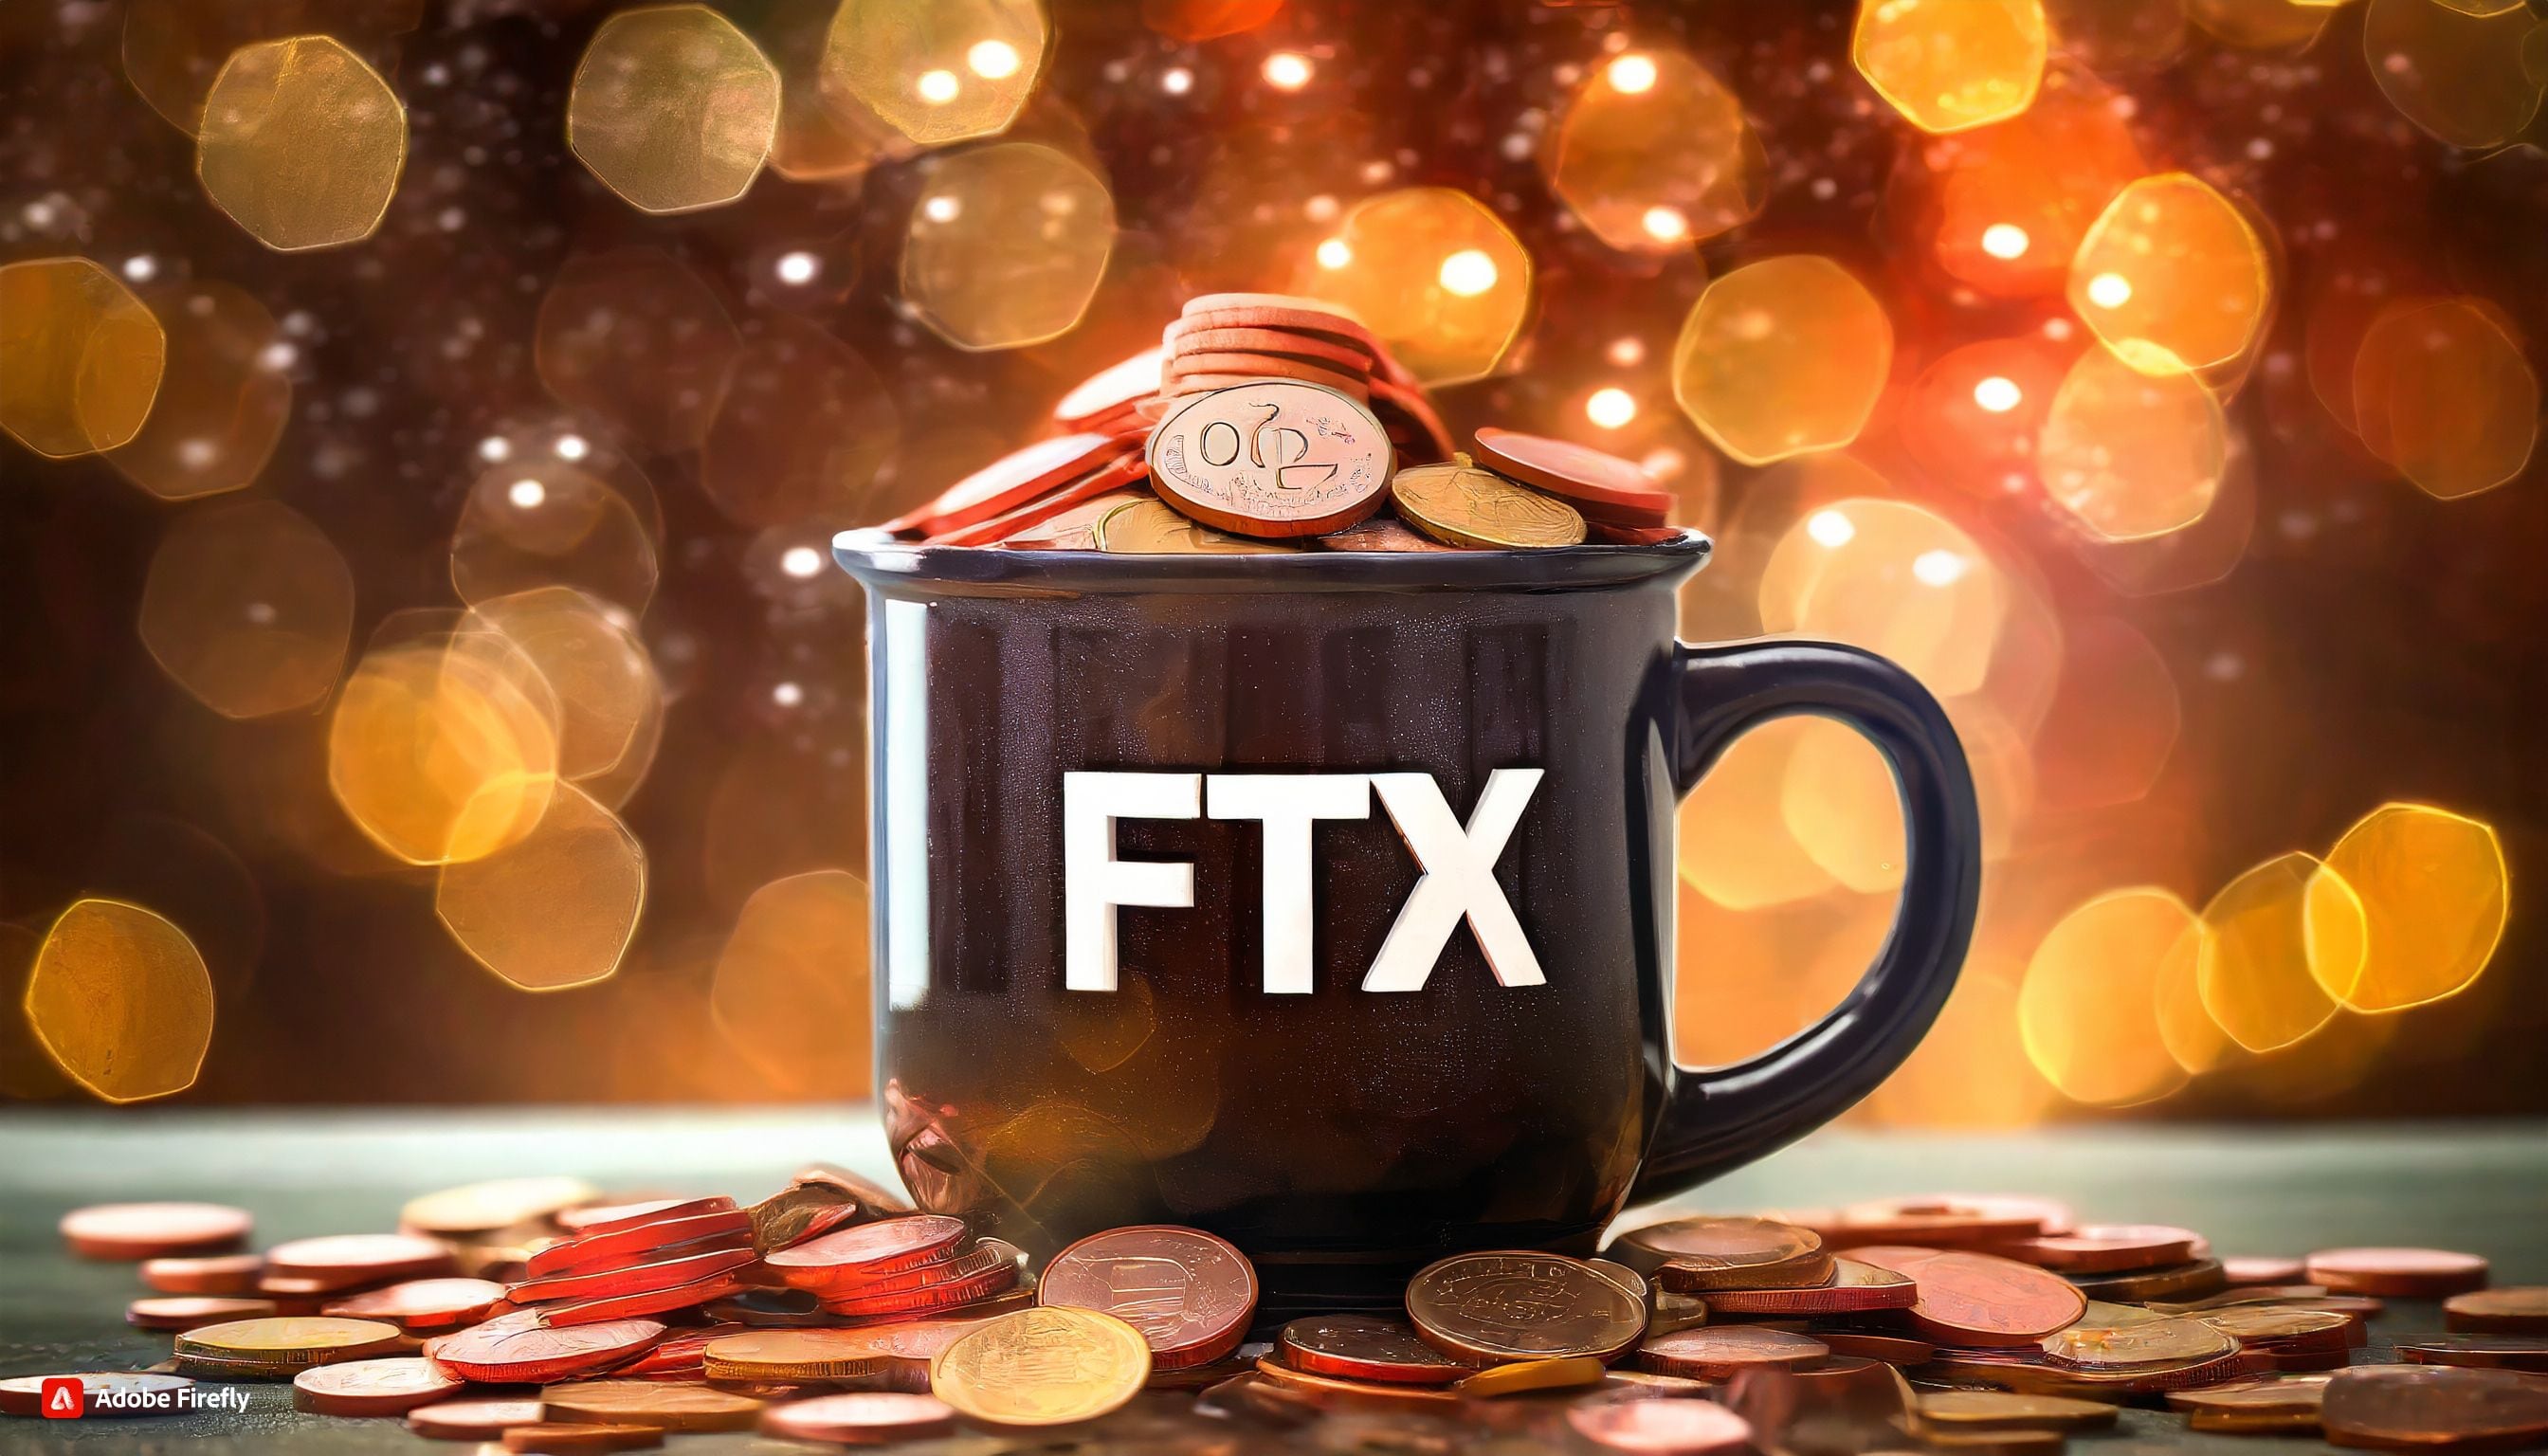 FTX looks poised to recover a surprisingly high amount for creditors, a year after Sam Bankman-Fried was undone by a CoinDesk scoop (Adobe Firefly)